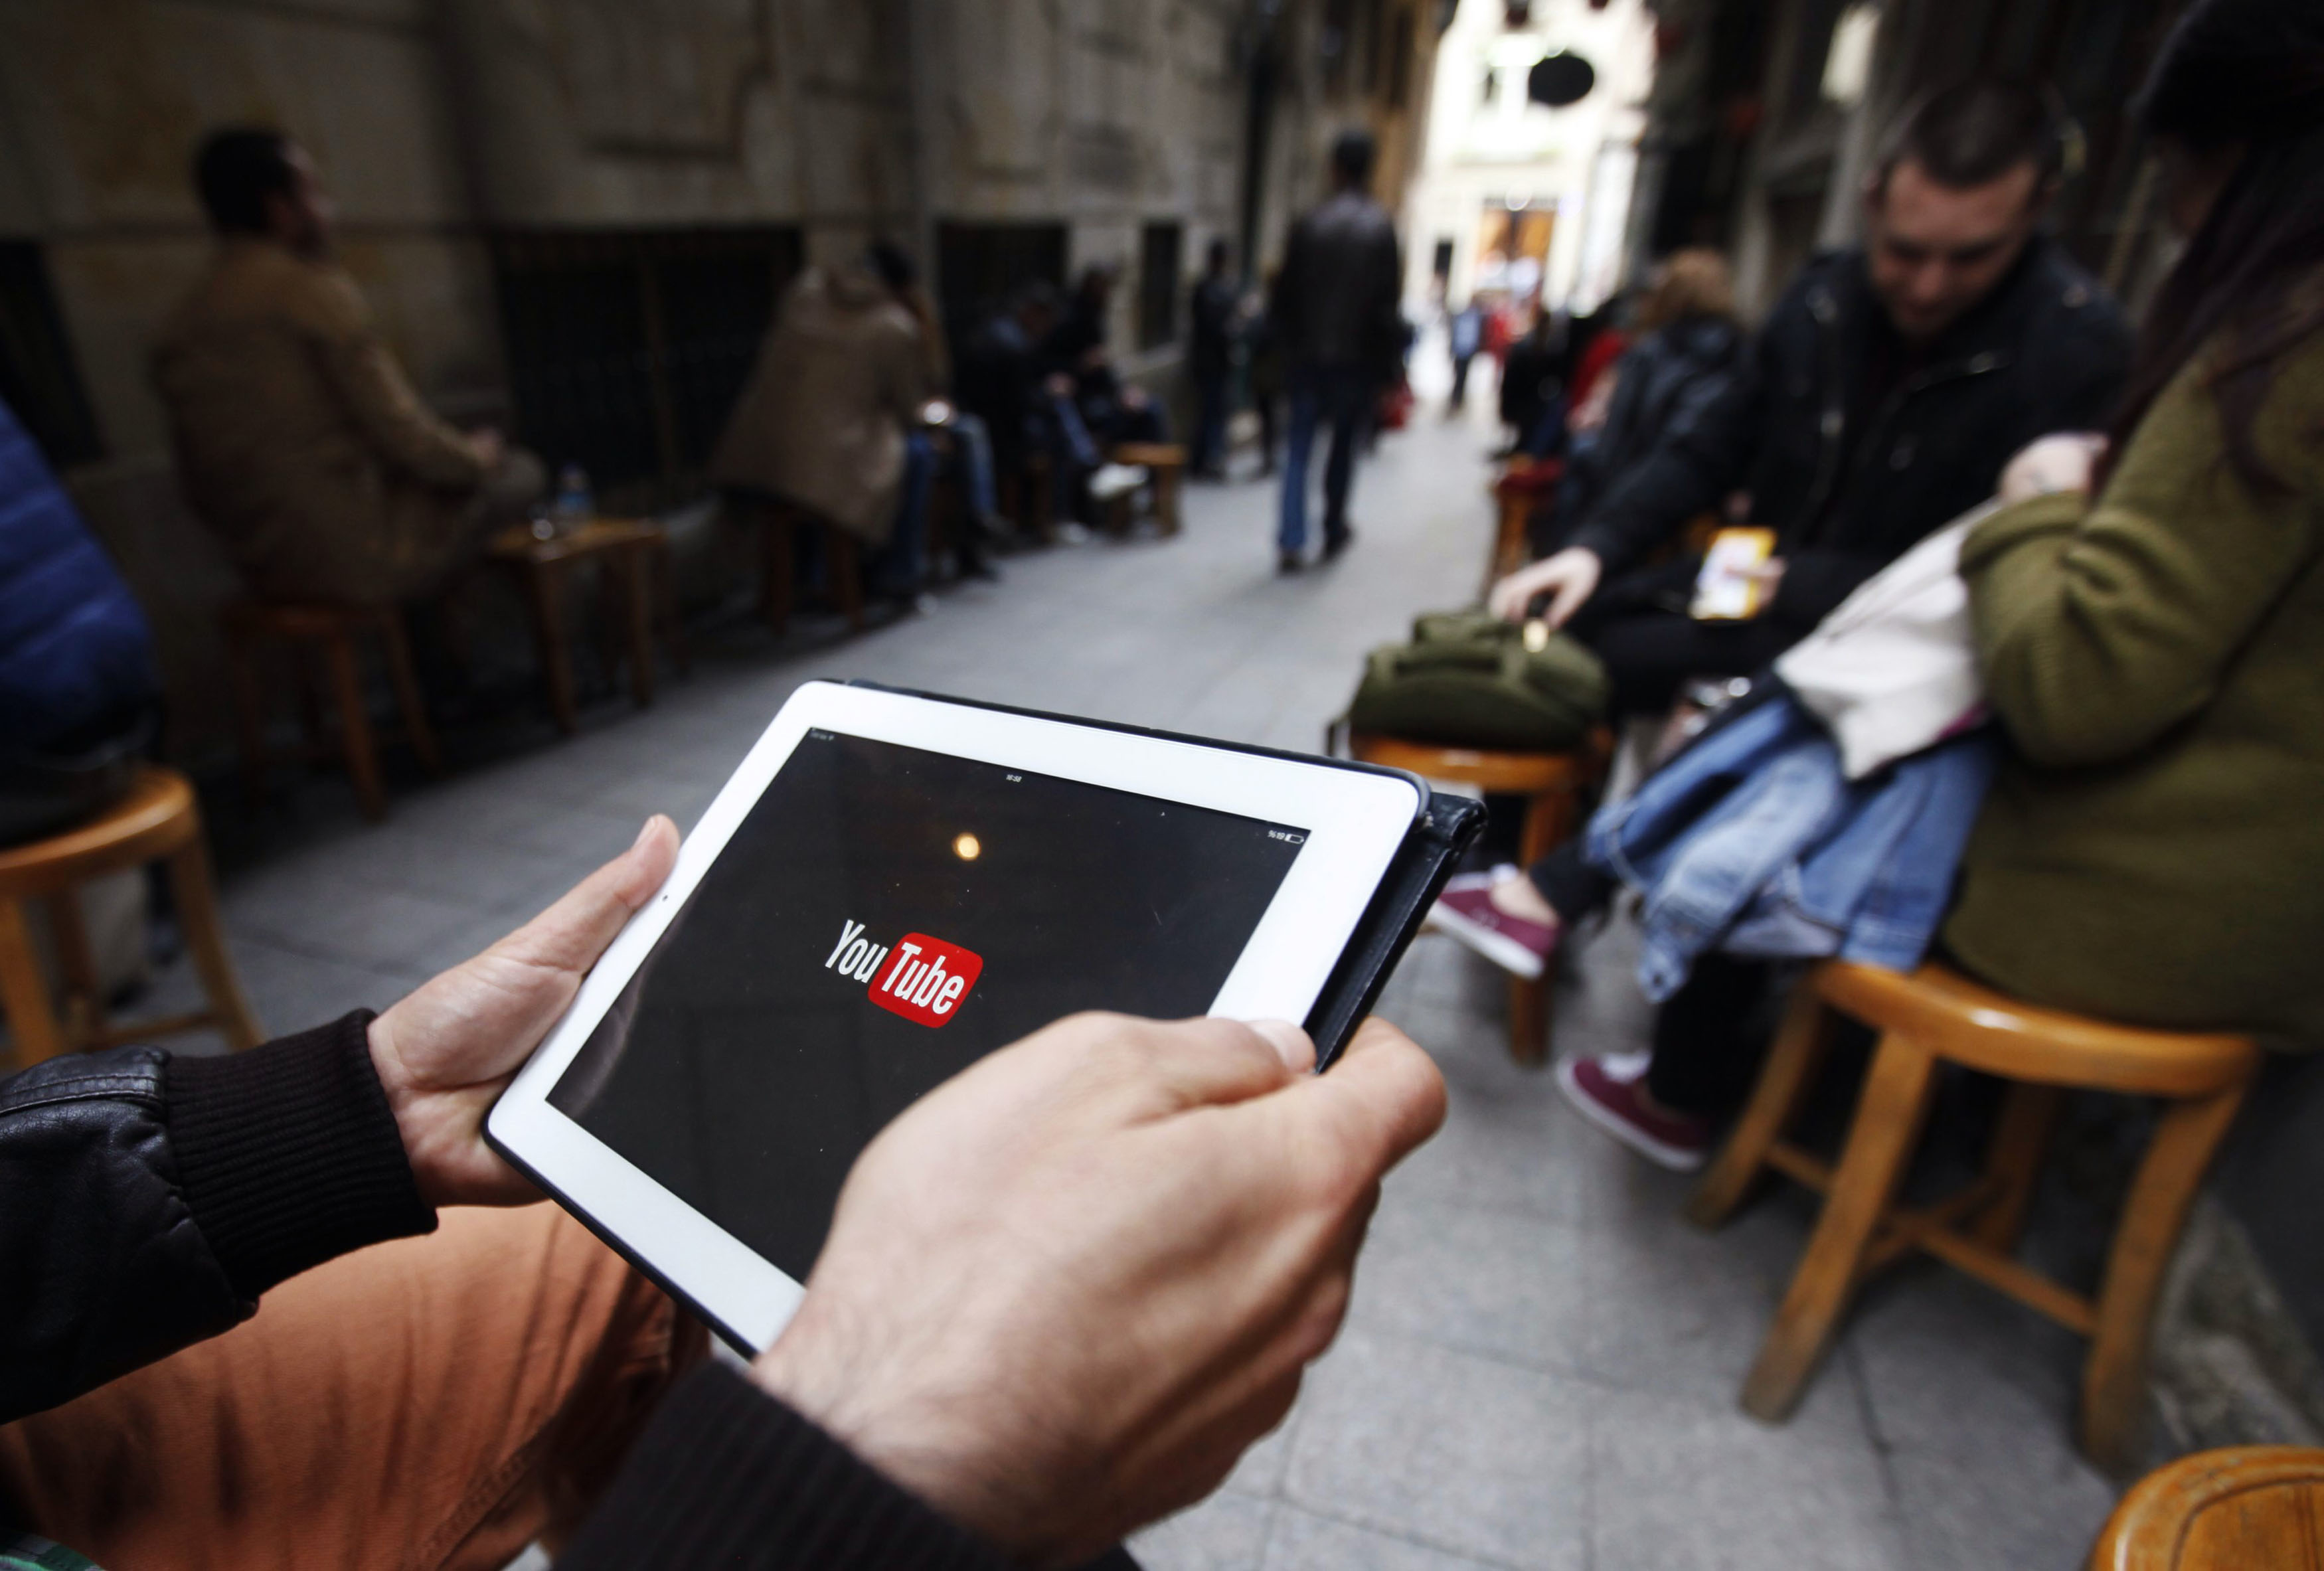 A man tries to connect to YouTube with his tablet at a café in Istanbul on March 27, 2014. (Osman Orsal—Reuters)